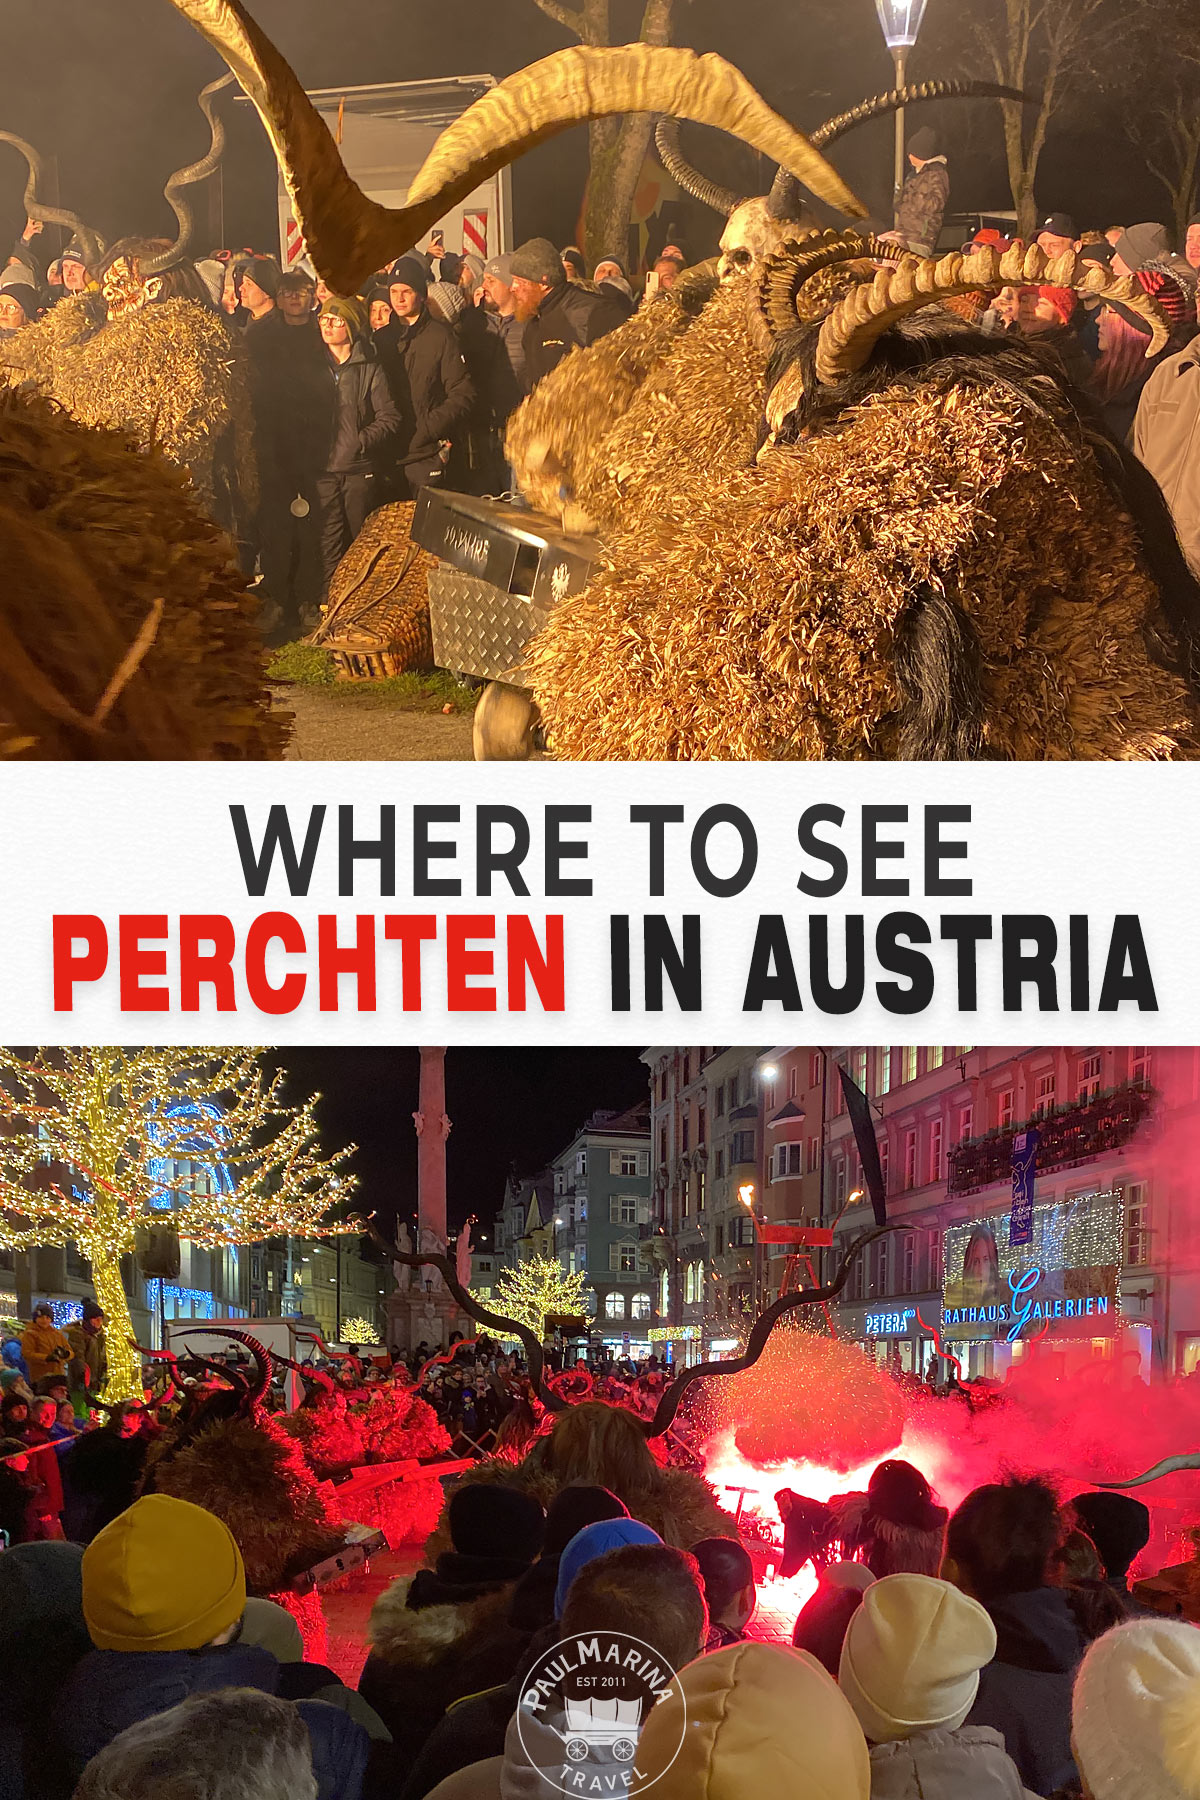 Perchten and Rauhnächte Rituals: What to Expect + Where to see them